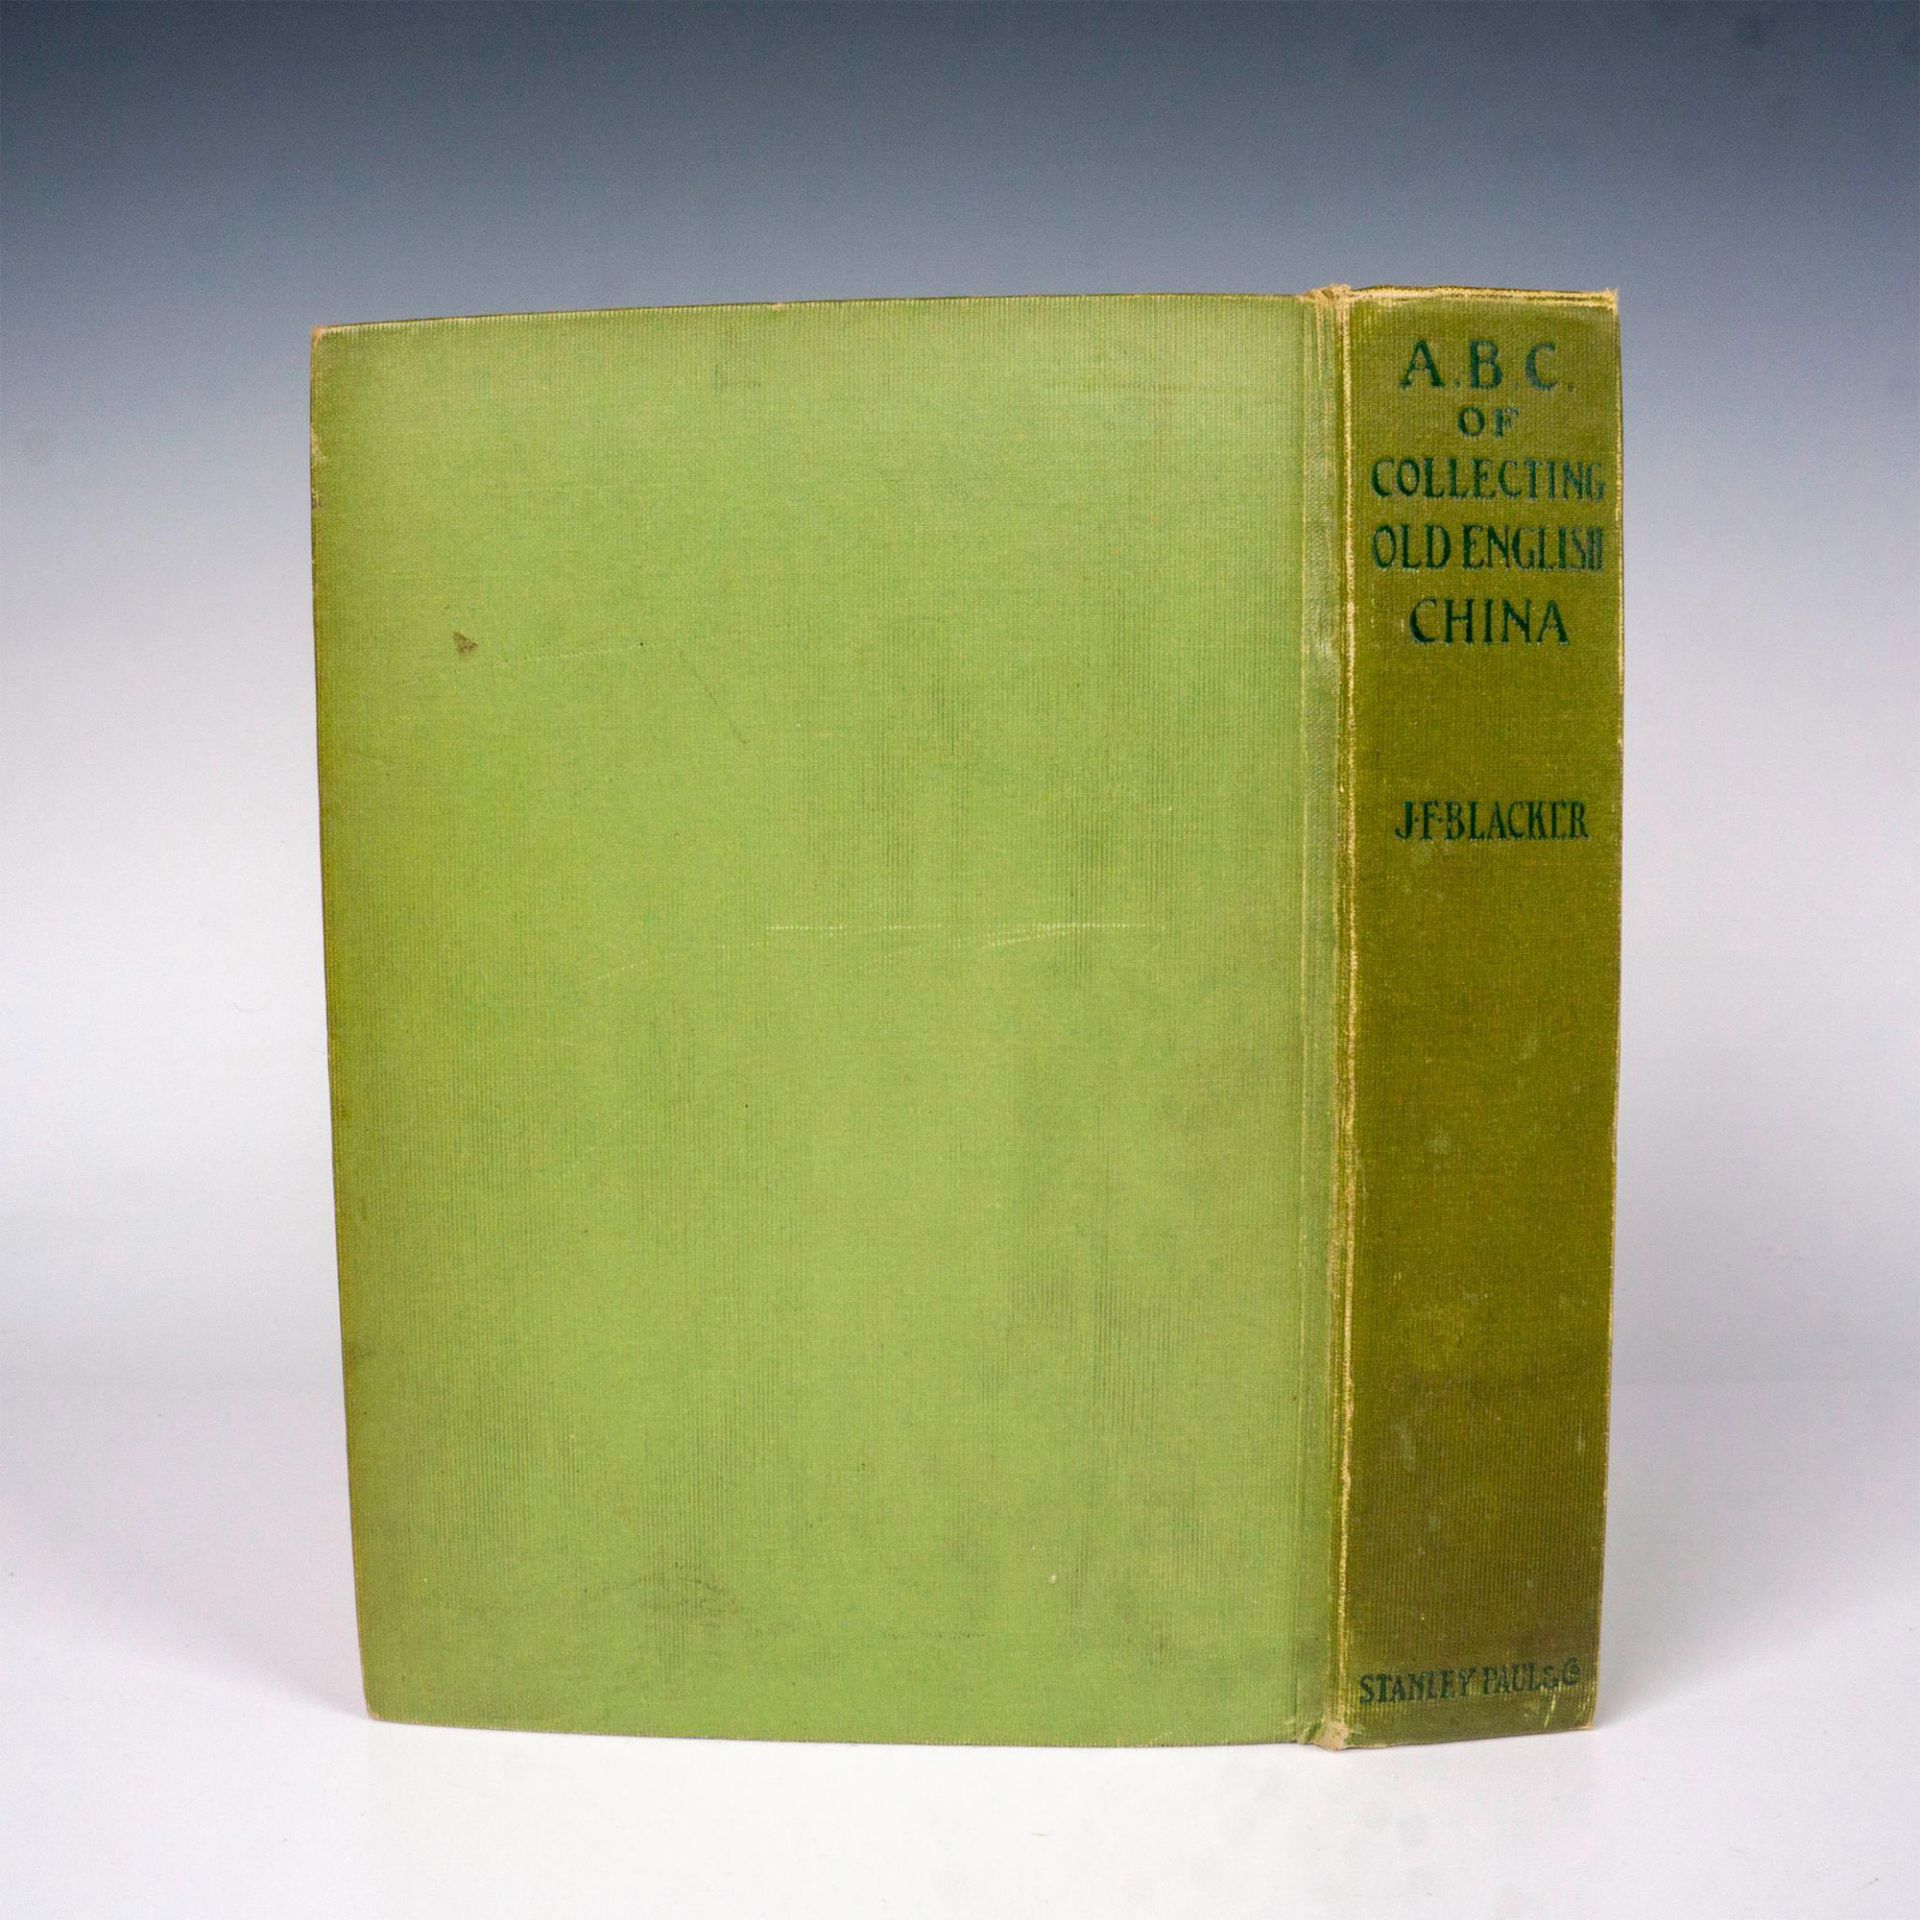 ABC of Collecting Old English China Book, by J. F Blacker - Image 2 of 4